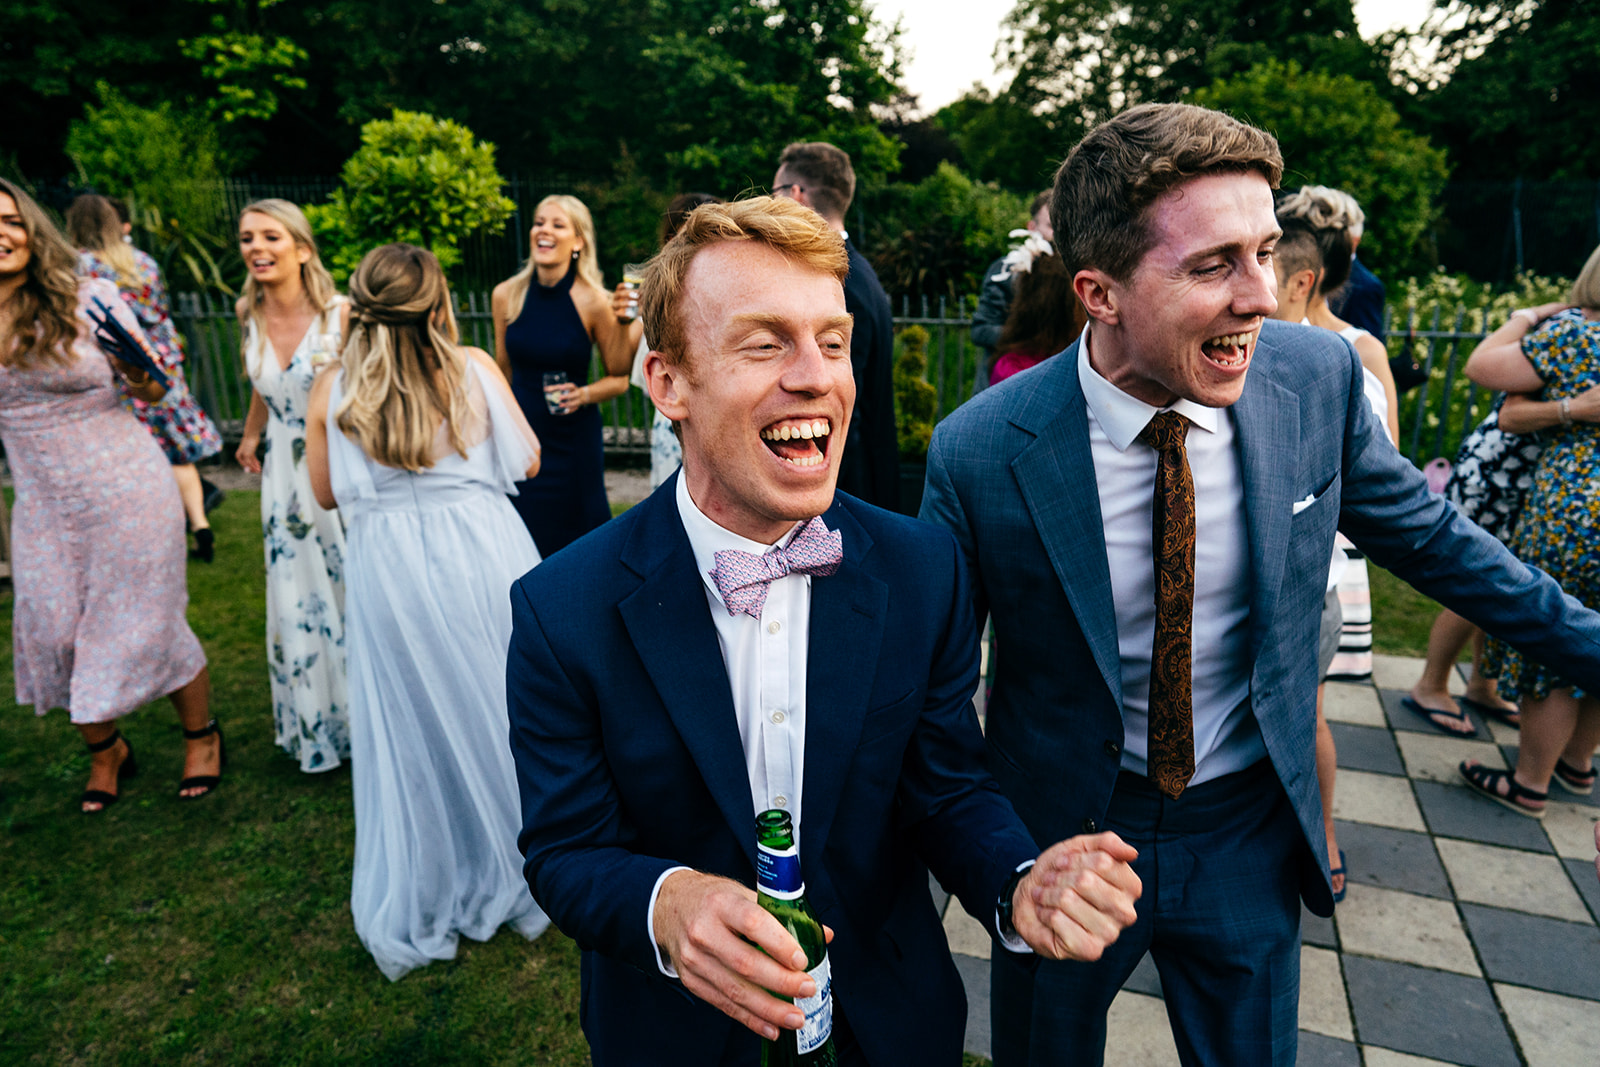 Wedding guests dancing in the gardens of Sefton Park Palm House in Liverpool